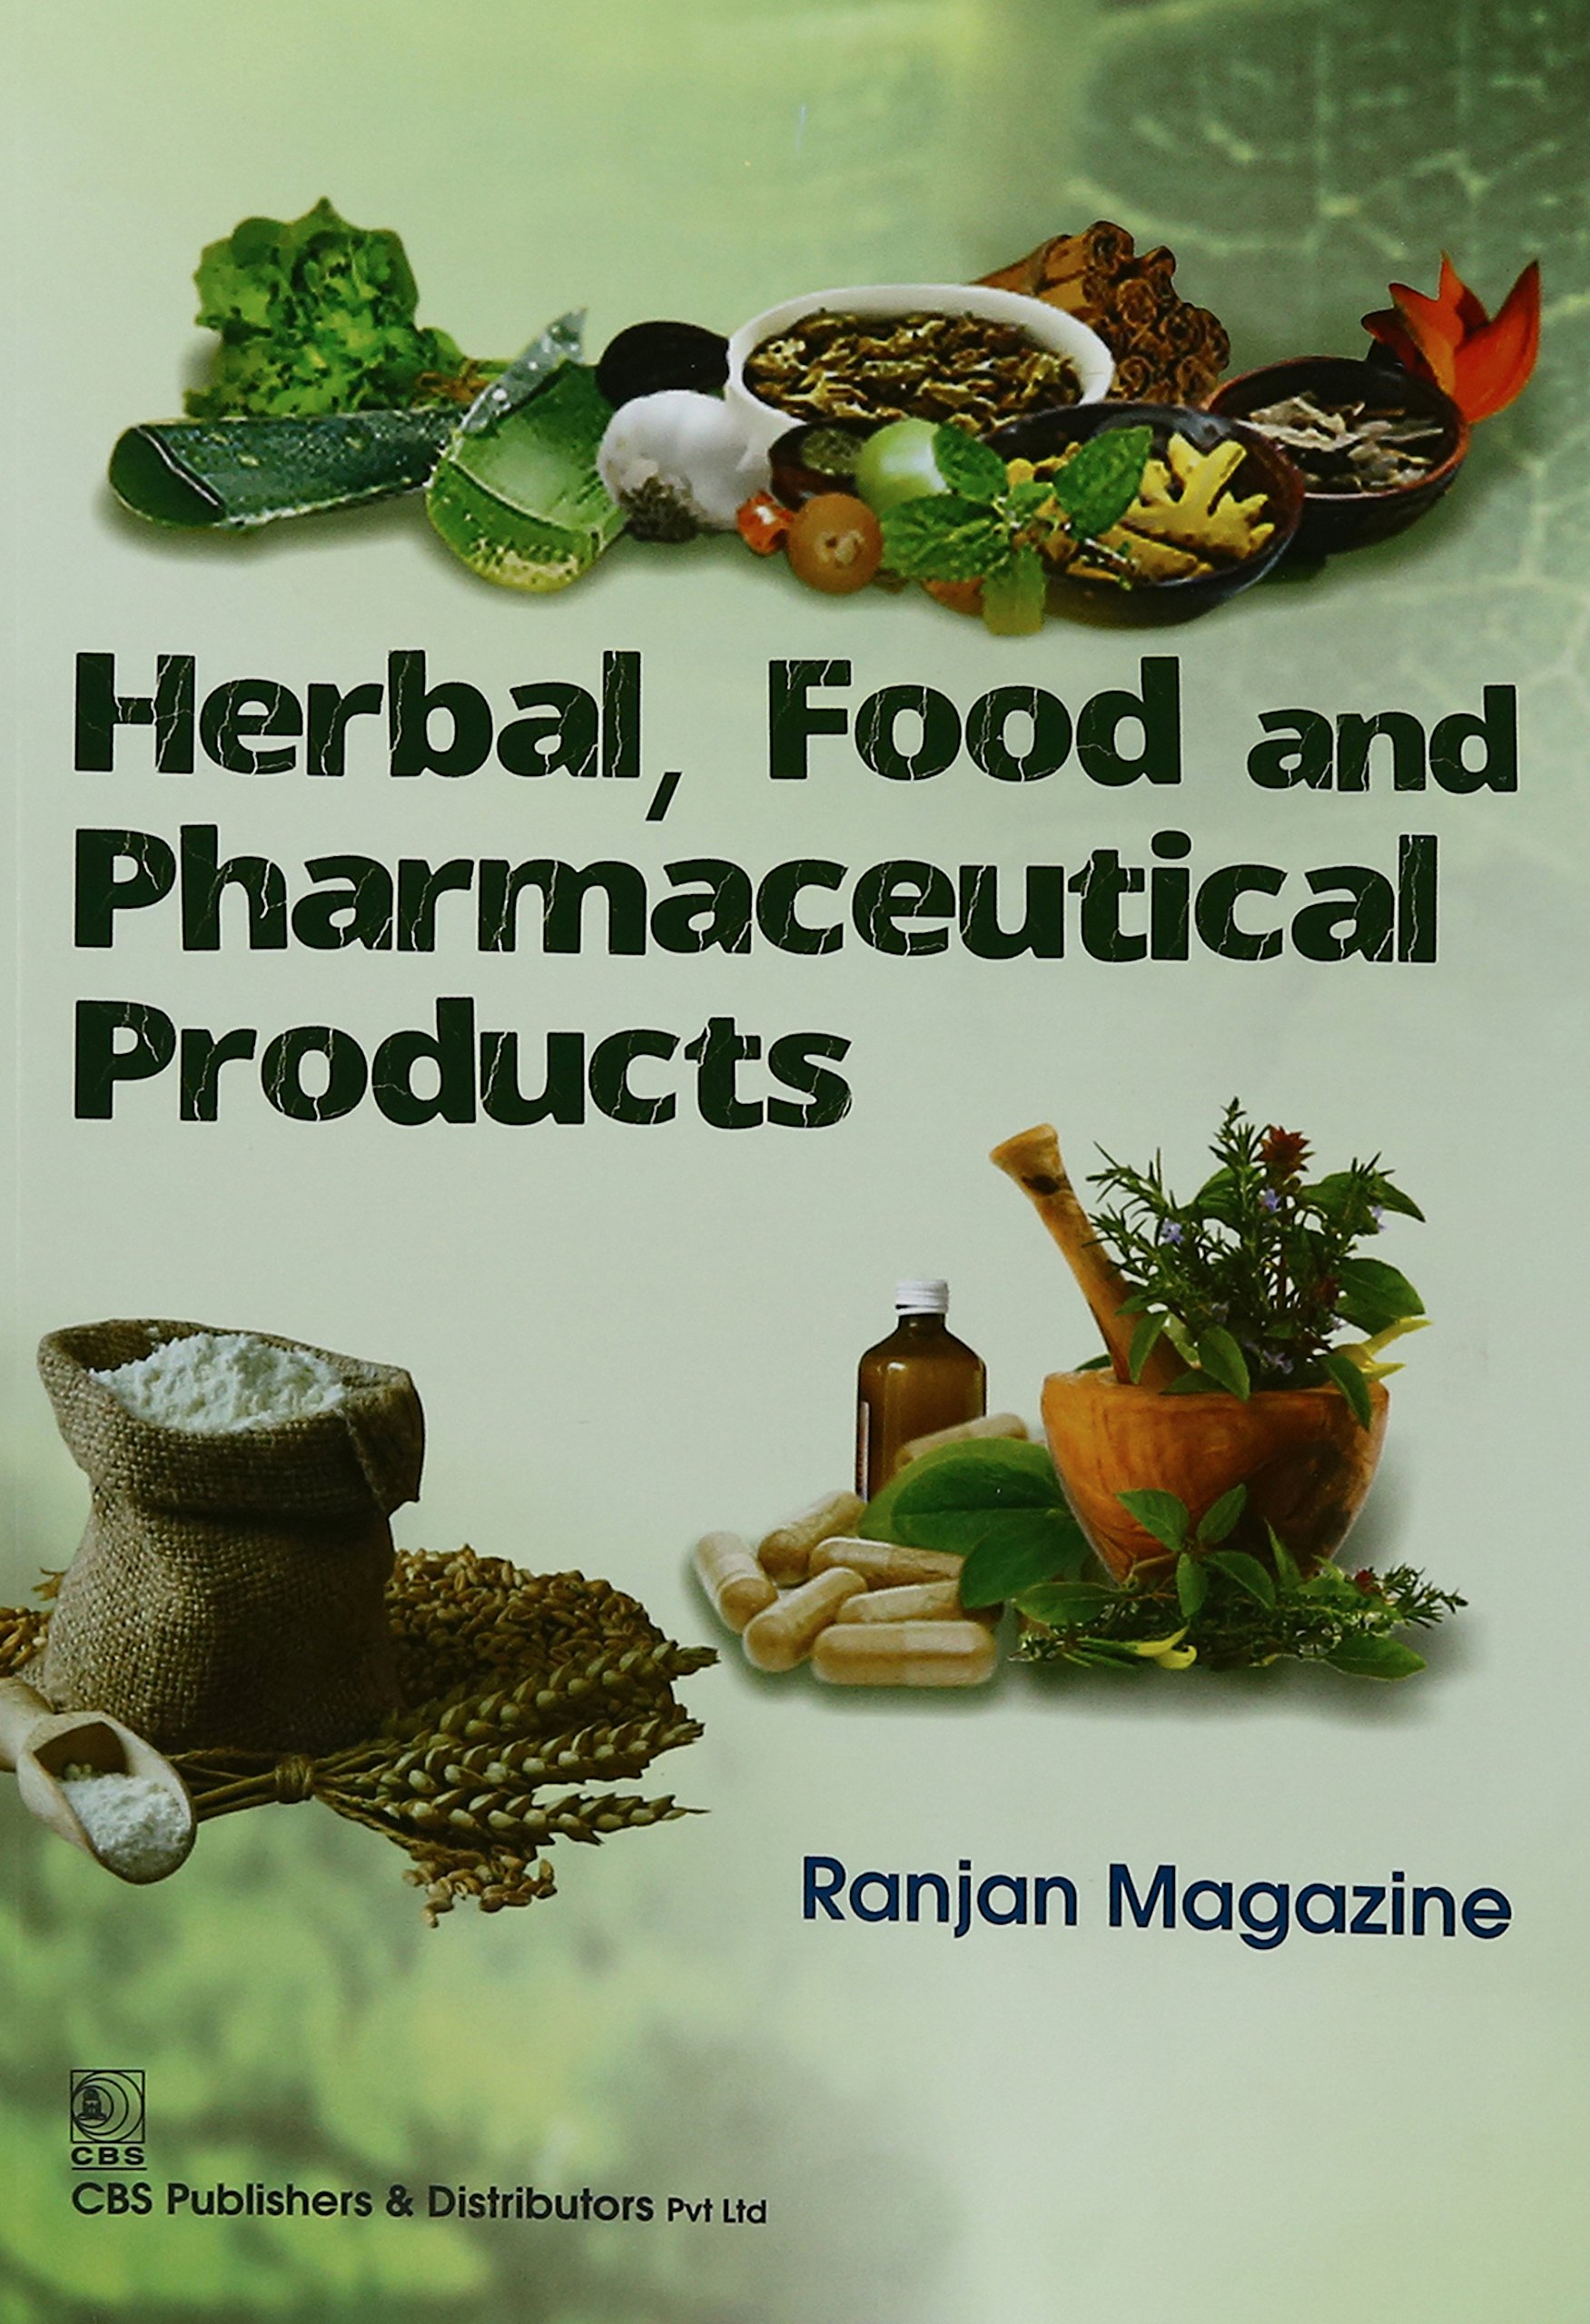 herbal-food-and-pharmaceutical-products-pb